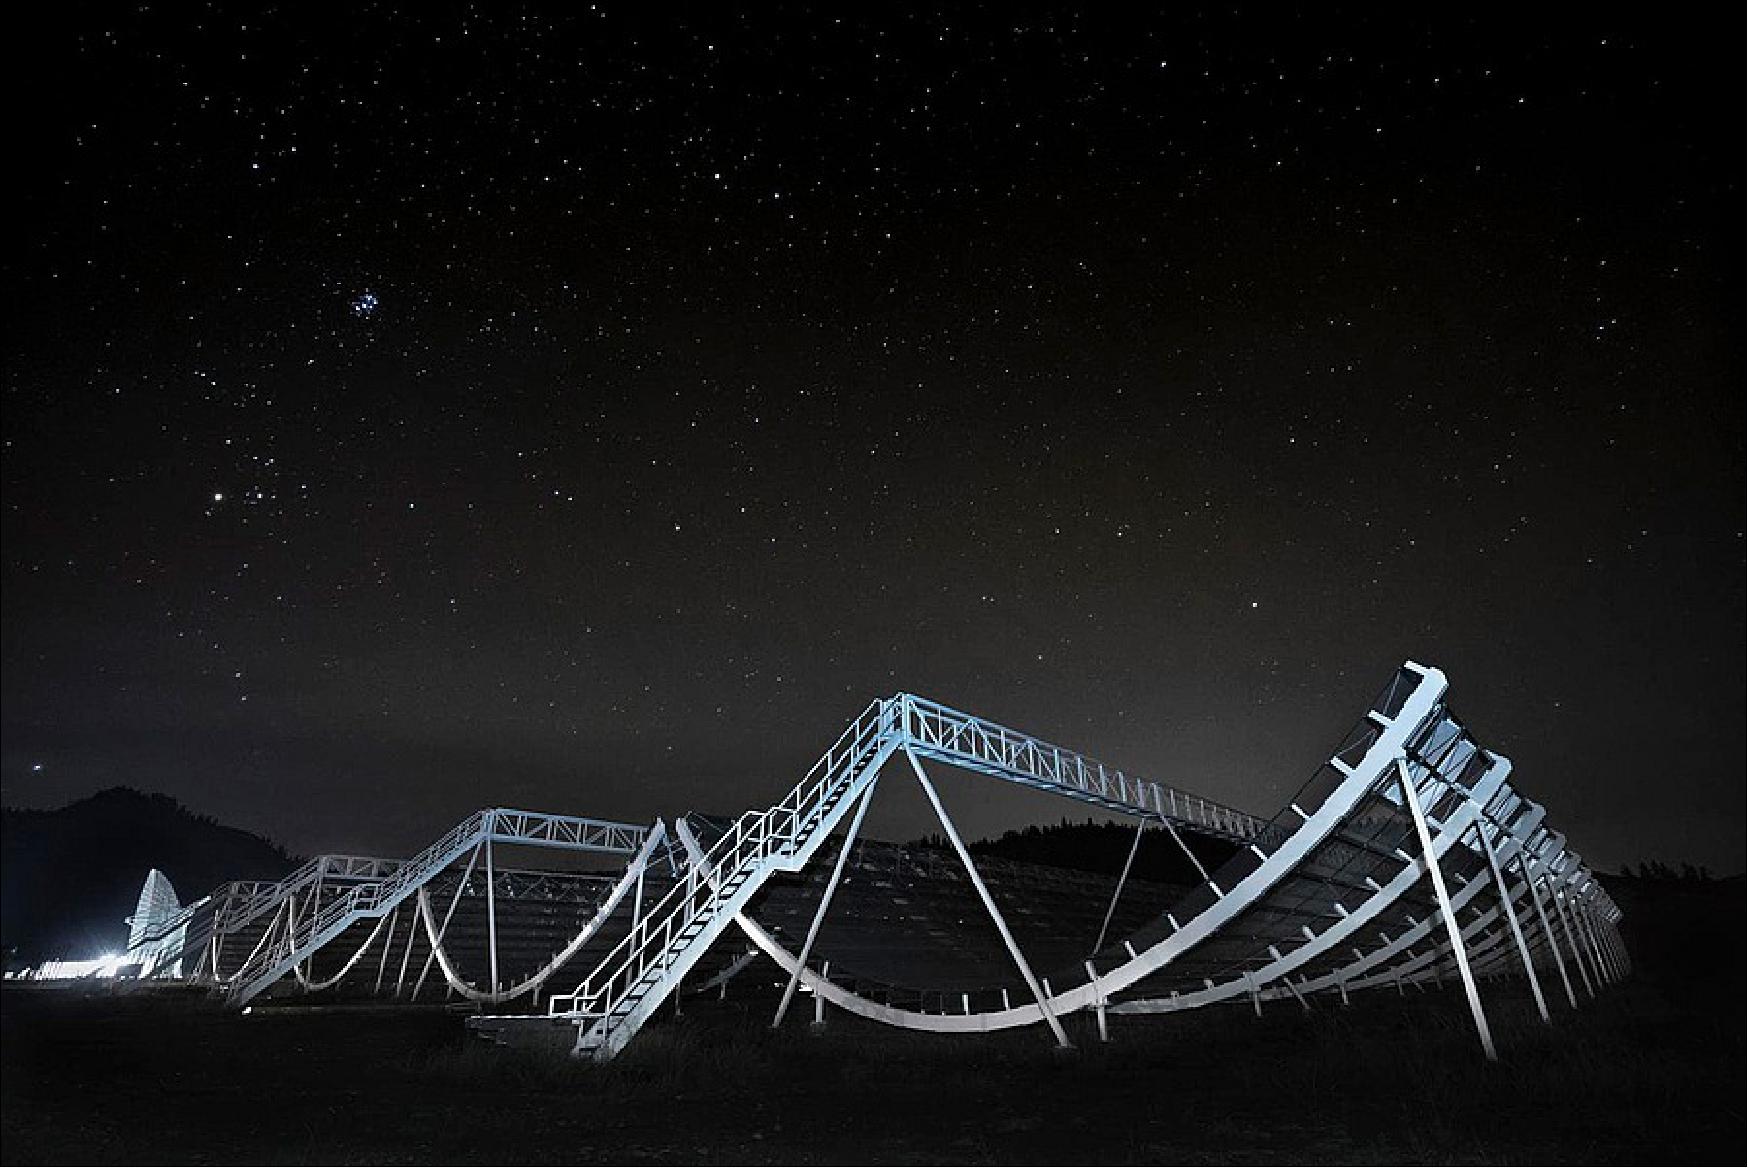 Figure 12: The large radio telescope CHIME, pictured here, has detected more than 500 mysterious fast radio bursts in its first year of operation, MIT researchers report (image credit: courtesy of CHIME)